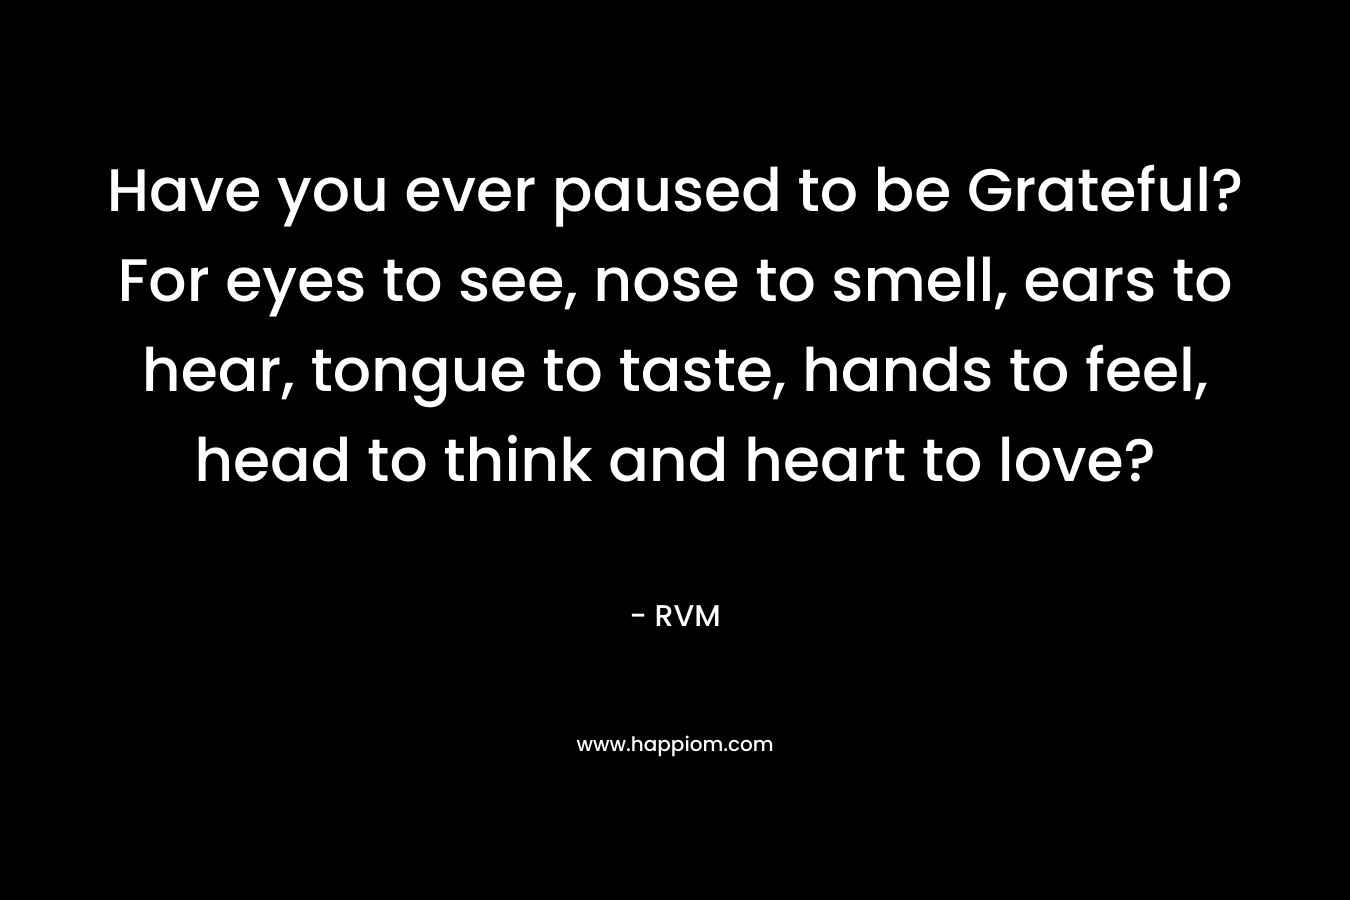 Have you ever paused to be Grateful? For eyes to see, nose to smell, ears to hear, tongue to taste, hands to feel, head to think and heart to love?